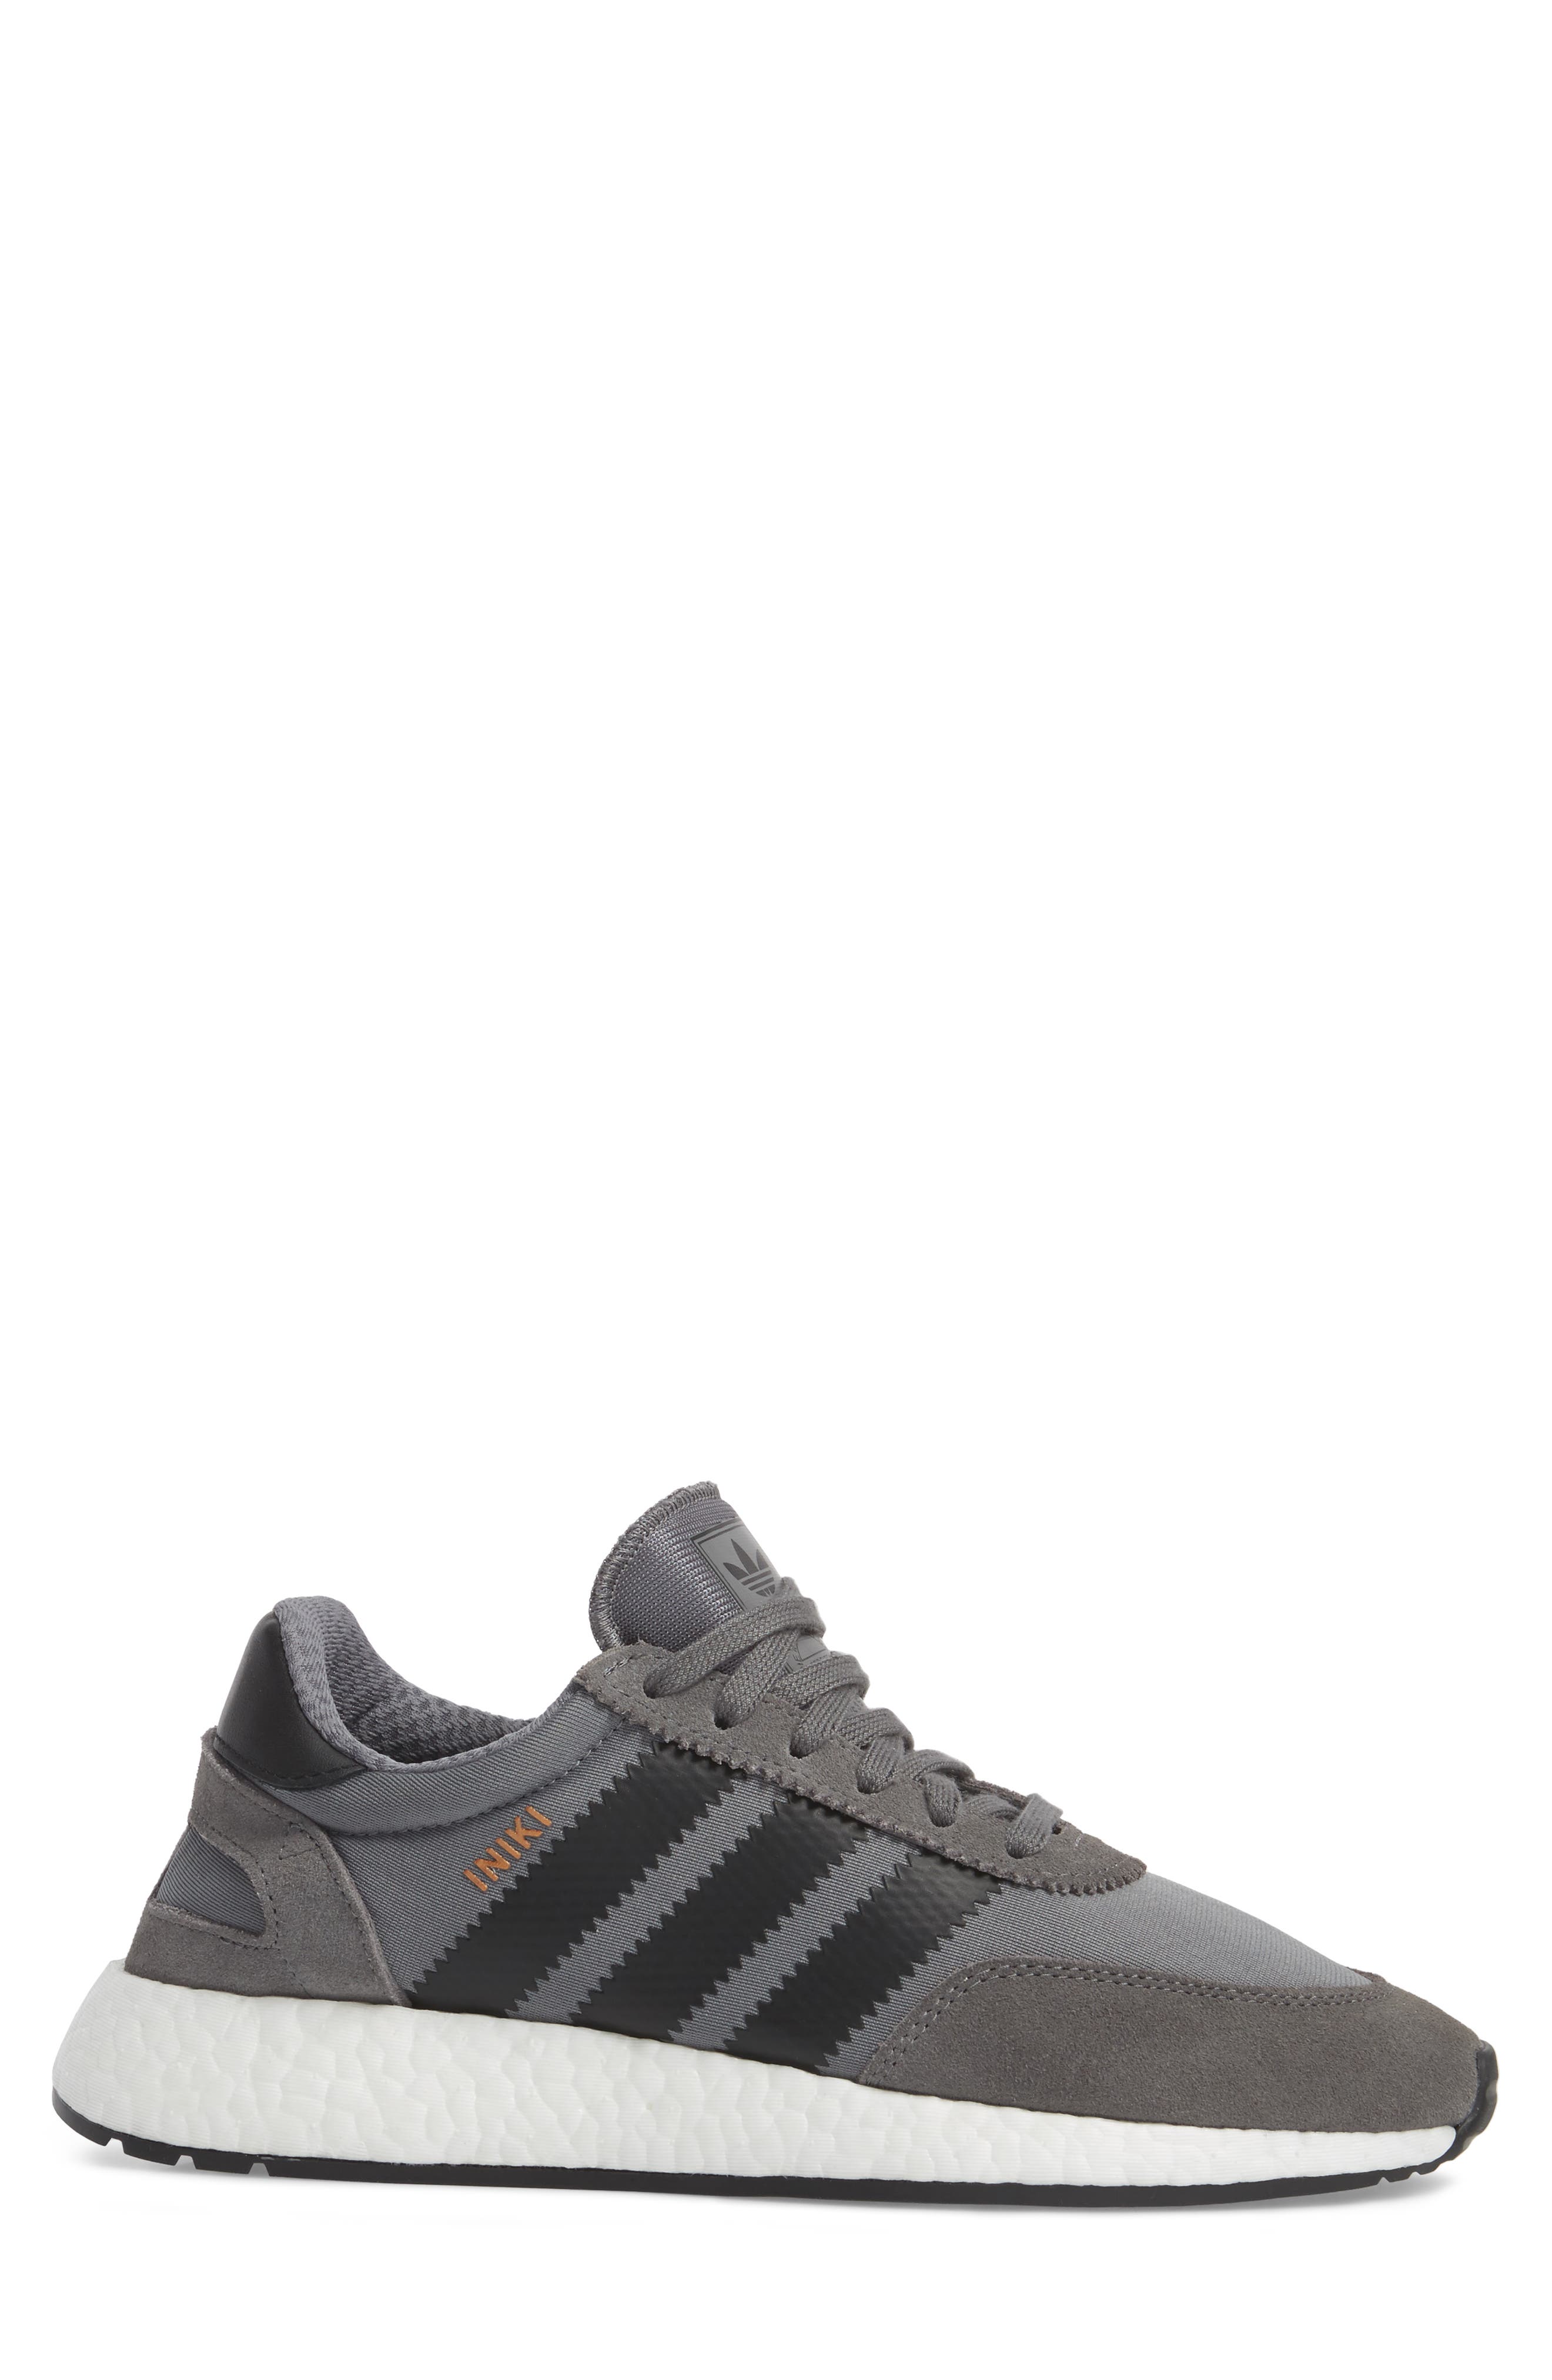 ADIDAS ORIGINALS I-5923 Runner Boost Sneakers In Gray By9732 - Gray ...